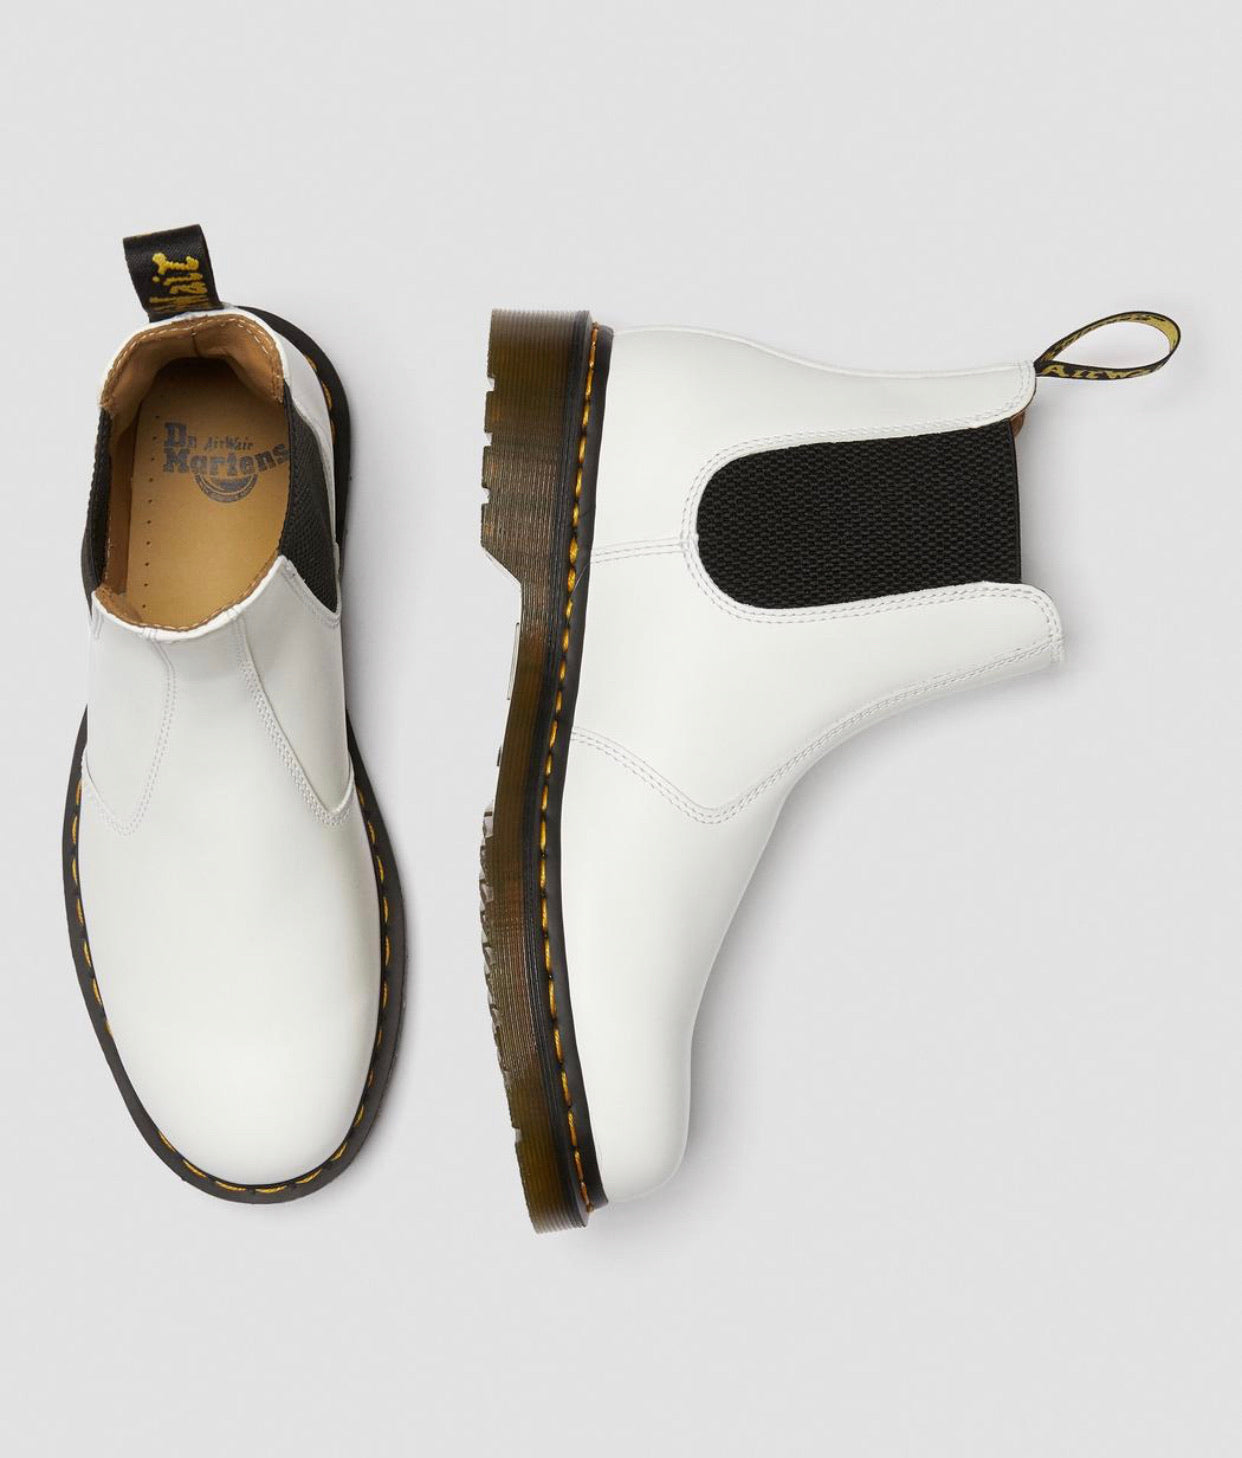 Dr. Martens 2976 White Yellow Stitch Chelsea Elastic Sided Boot